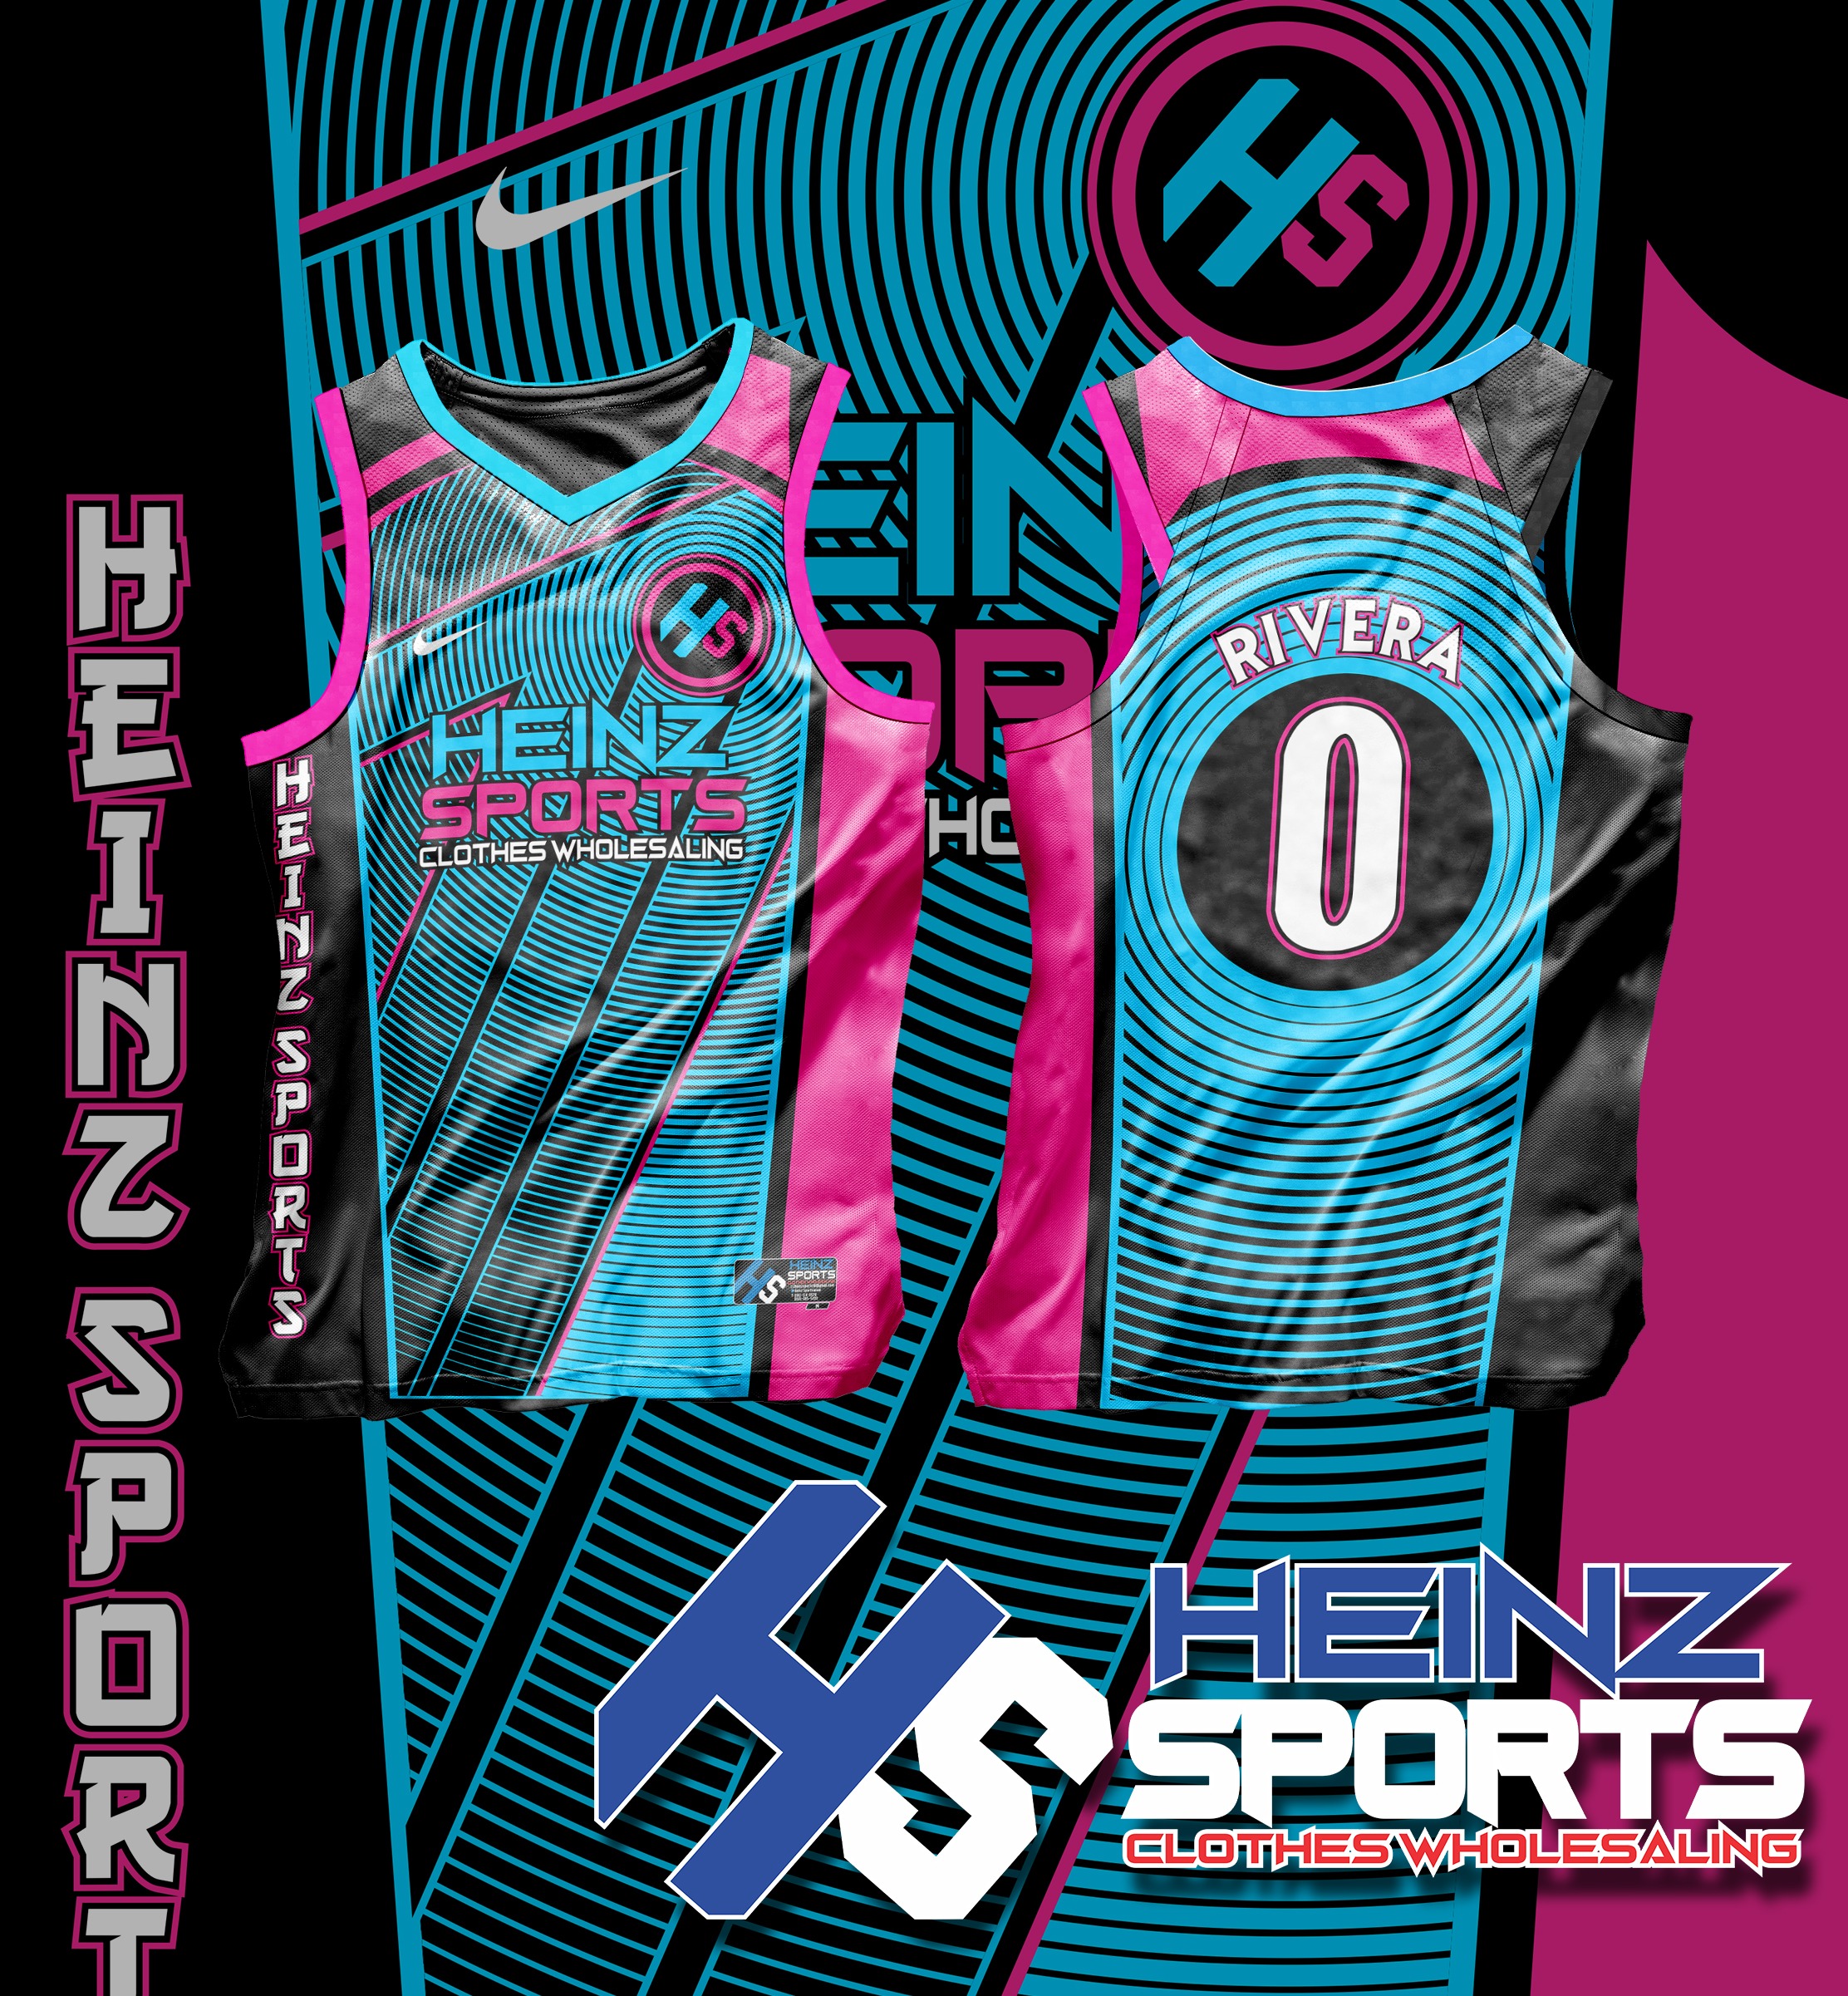 FULL SUBLIMATION CUSTOMIZE JERSEY. VISIT MY PROFILE KUNG PANO MAG ORDE